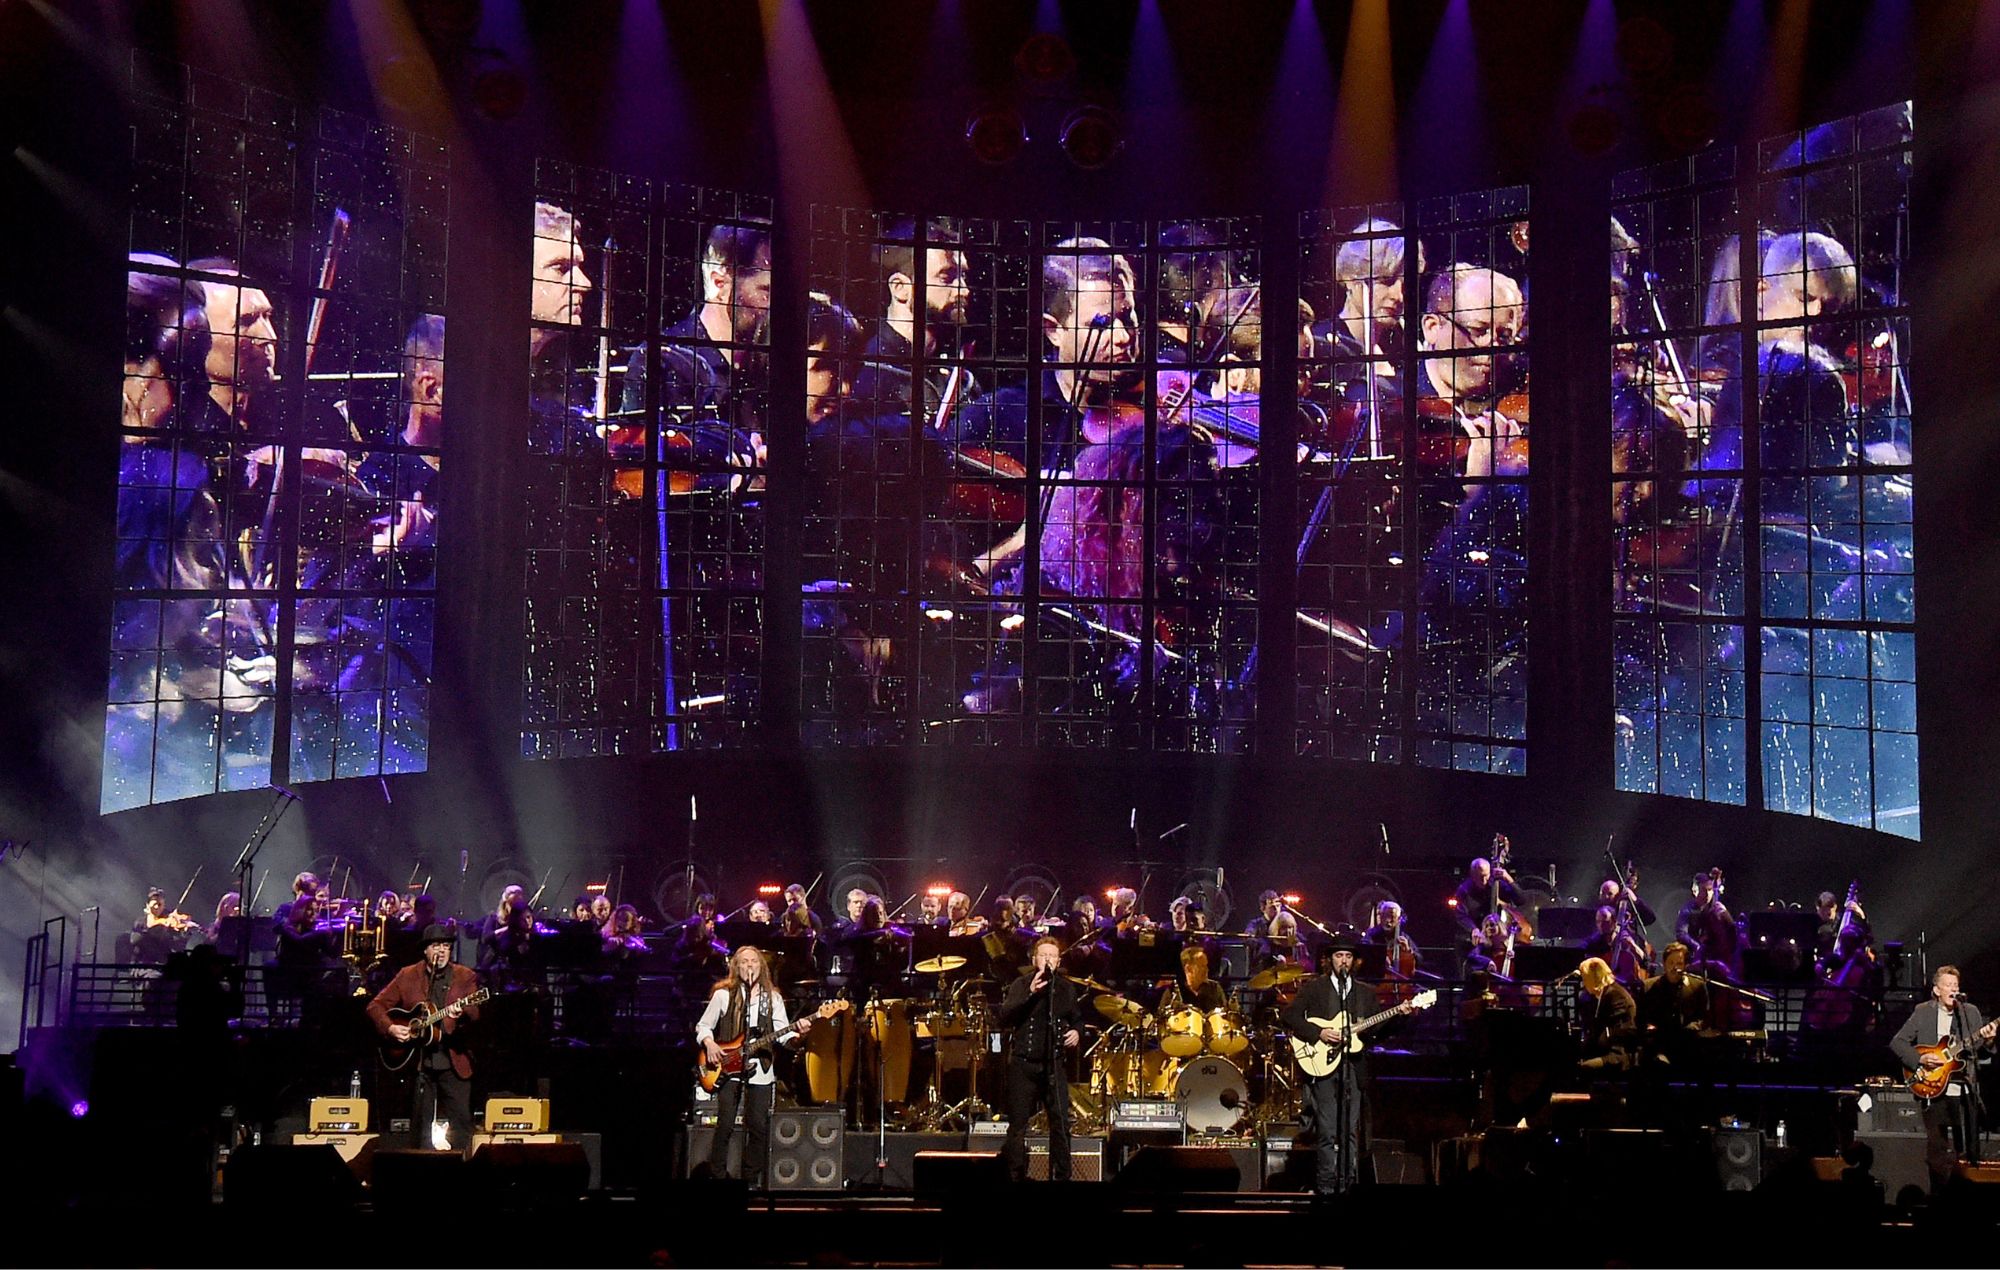 Vince Gill, Timothy B. Schmit, Don Henley, Scott F. Crago, Deacon Frey, Joe Walsh and Steuart Smith of the Eagles perform with an orchestra at MGM Grand Garden Arena on September 27, 2019 in Las Vegas, Nevada. 